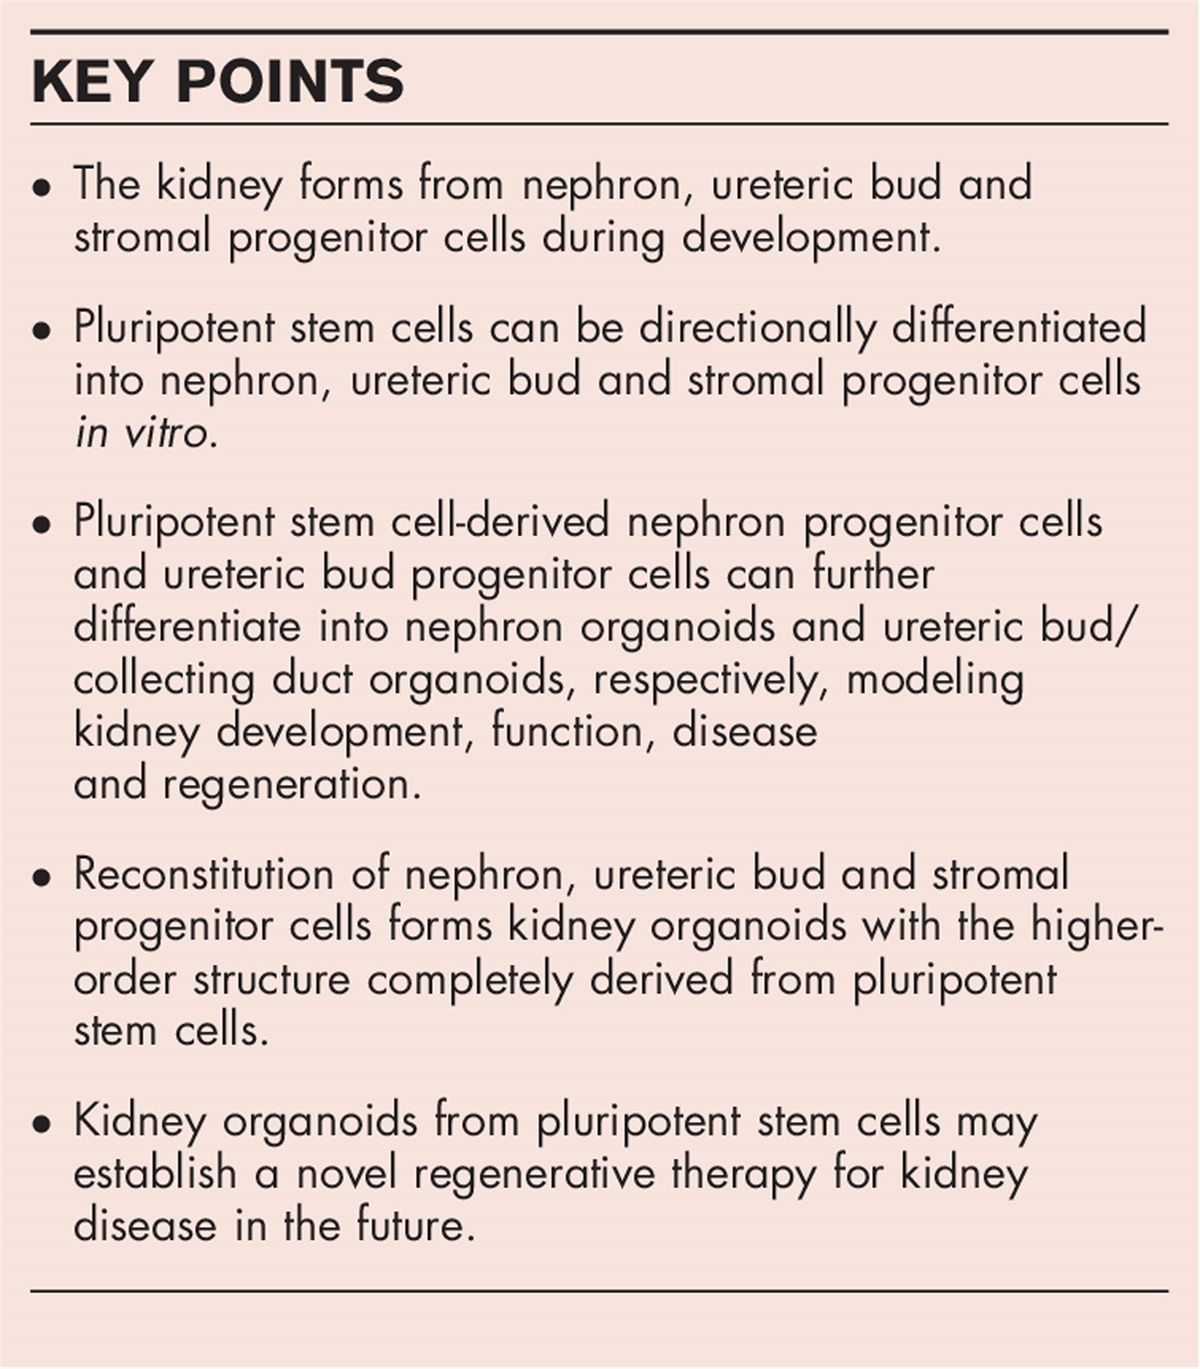 Building kidney organoids from pluripotent stem cells